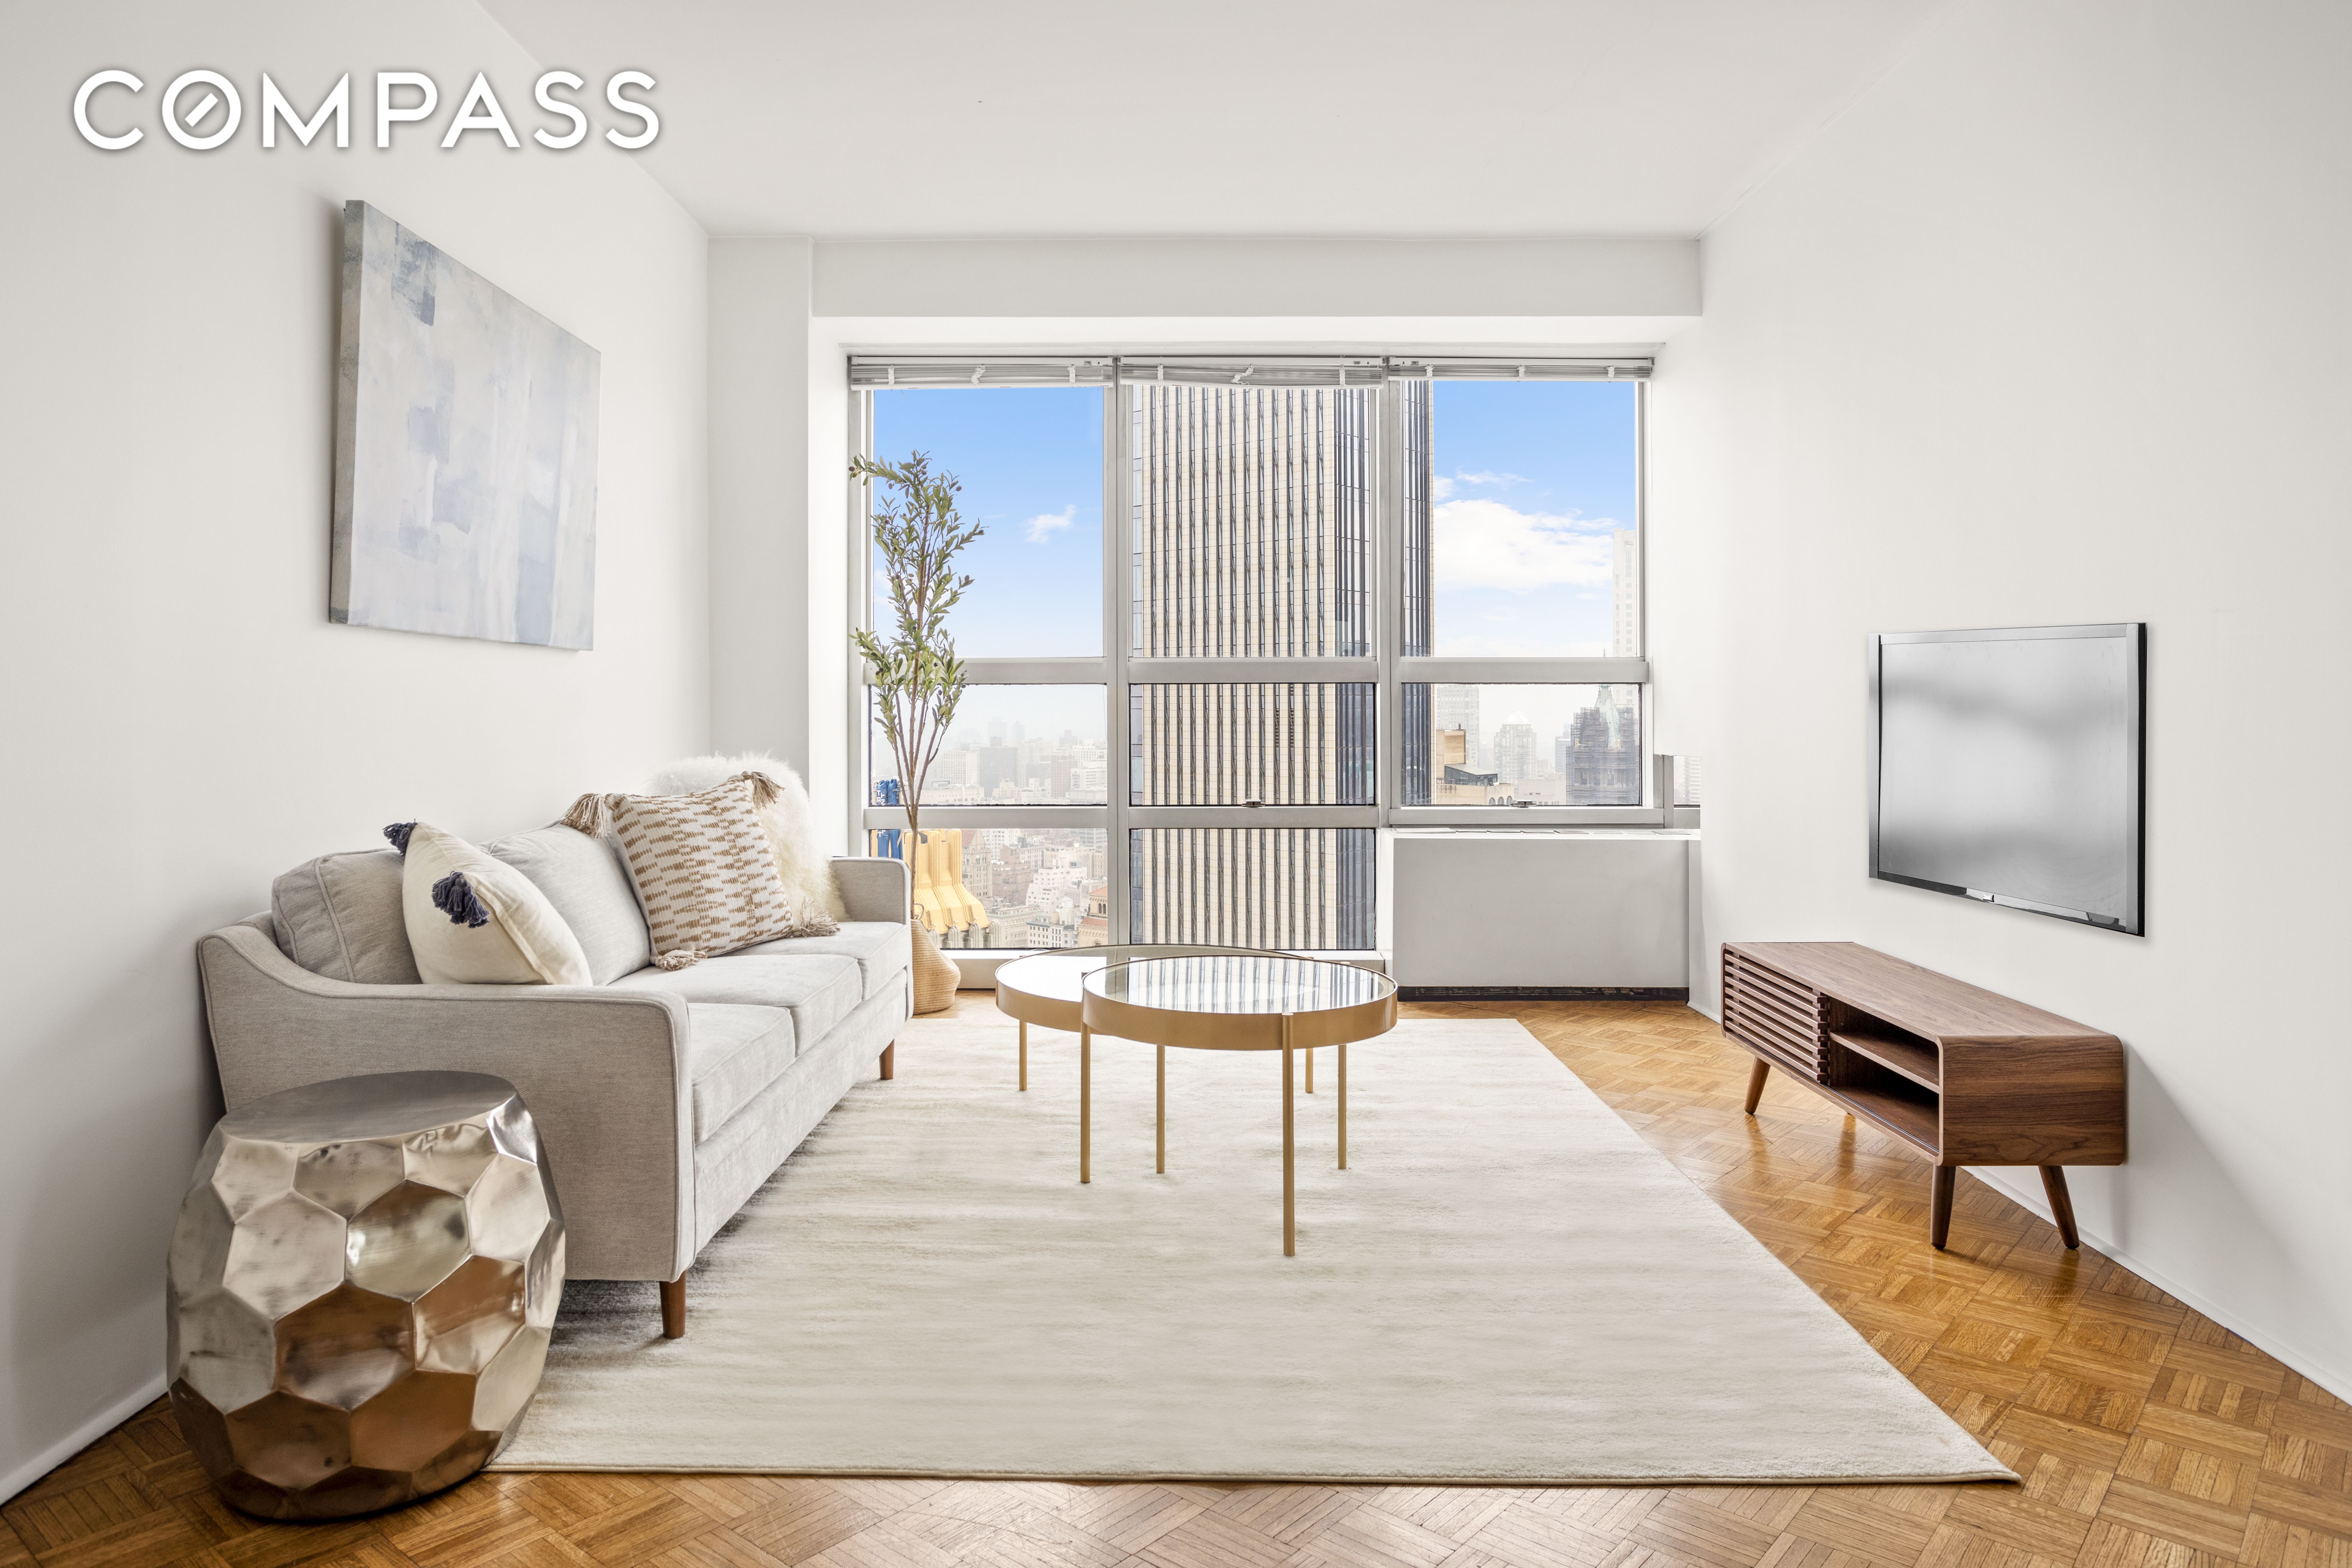 146 West 57th Street 56C, Theater District, Midtown West, NYC - 2 Bedrooms  
1.5 Bathrooms  
4 Rooms - 